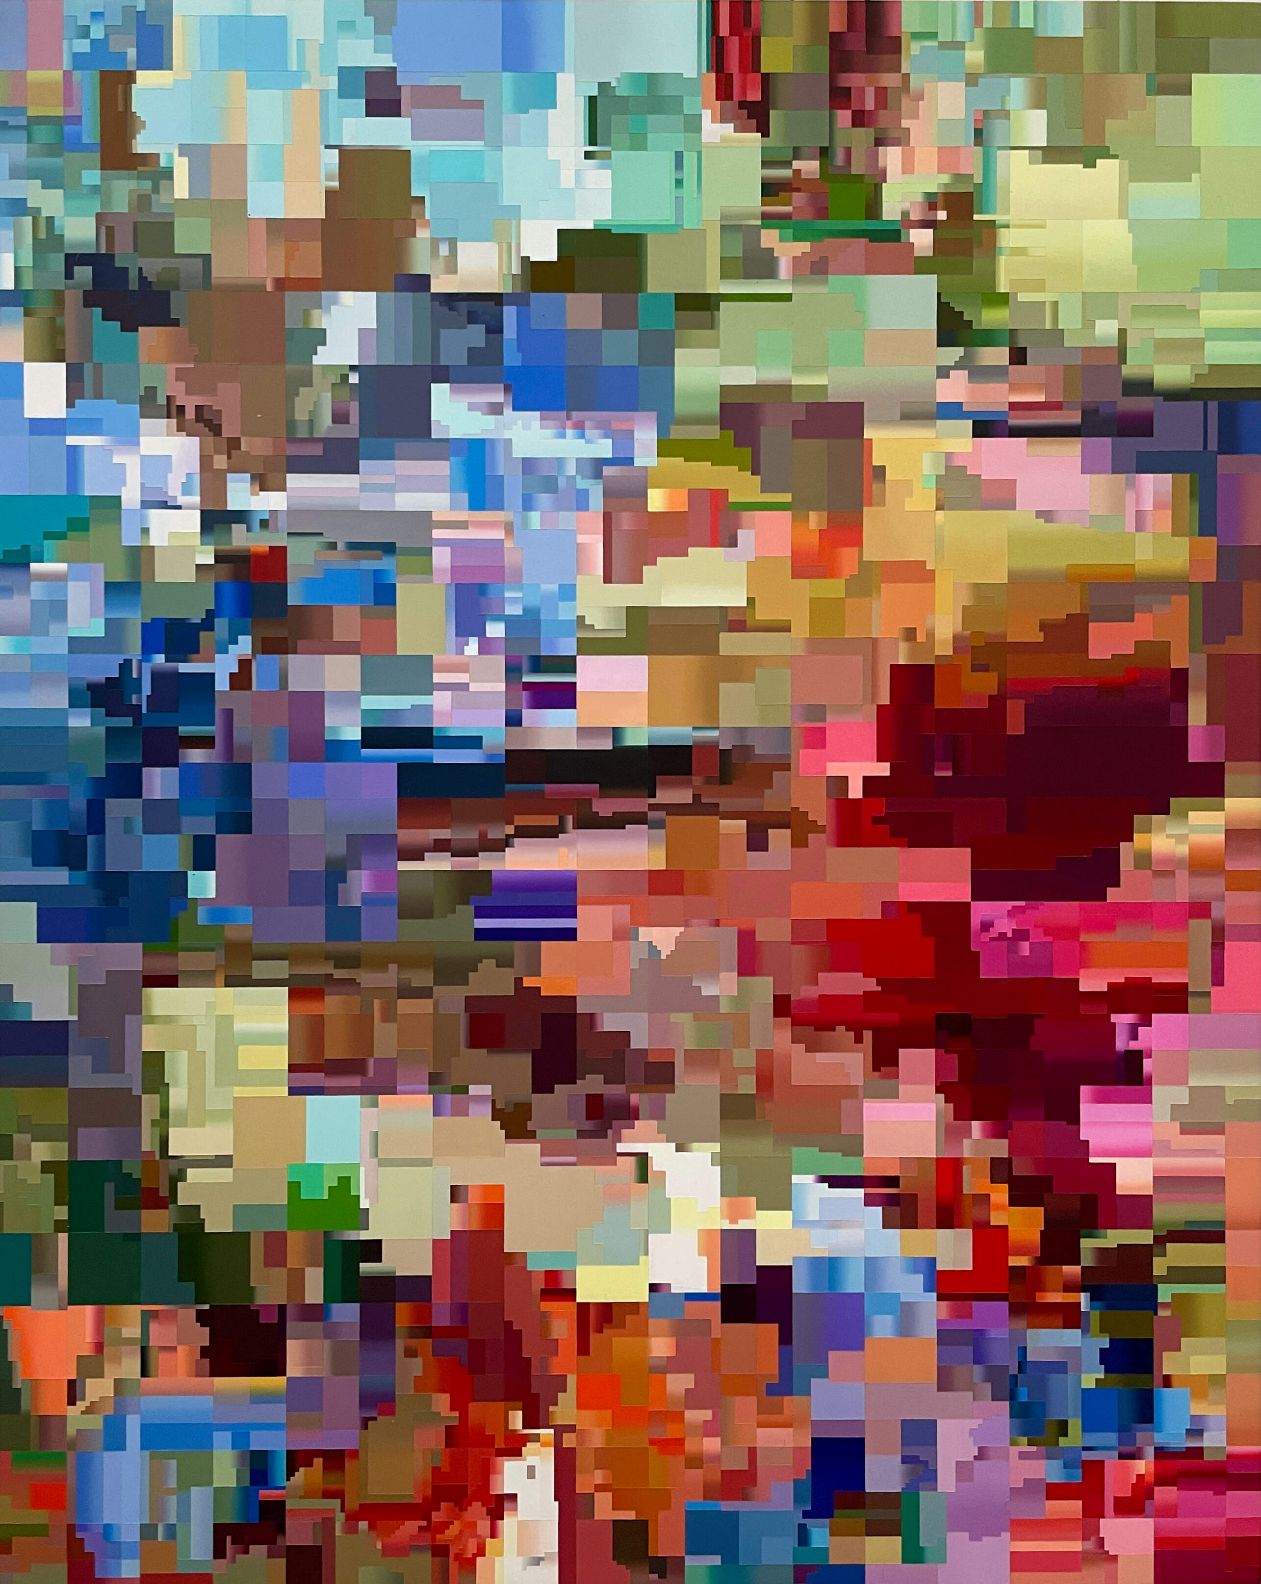 Oil painting by artist and painter Paul Lemmon in bright colours of blue, red and pink depicting a pixelated frame from a glitched digital video